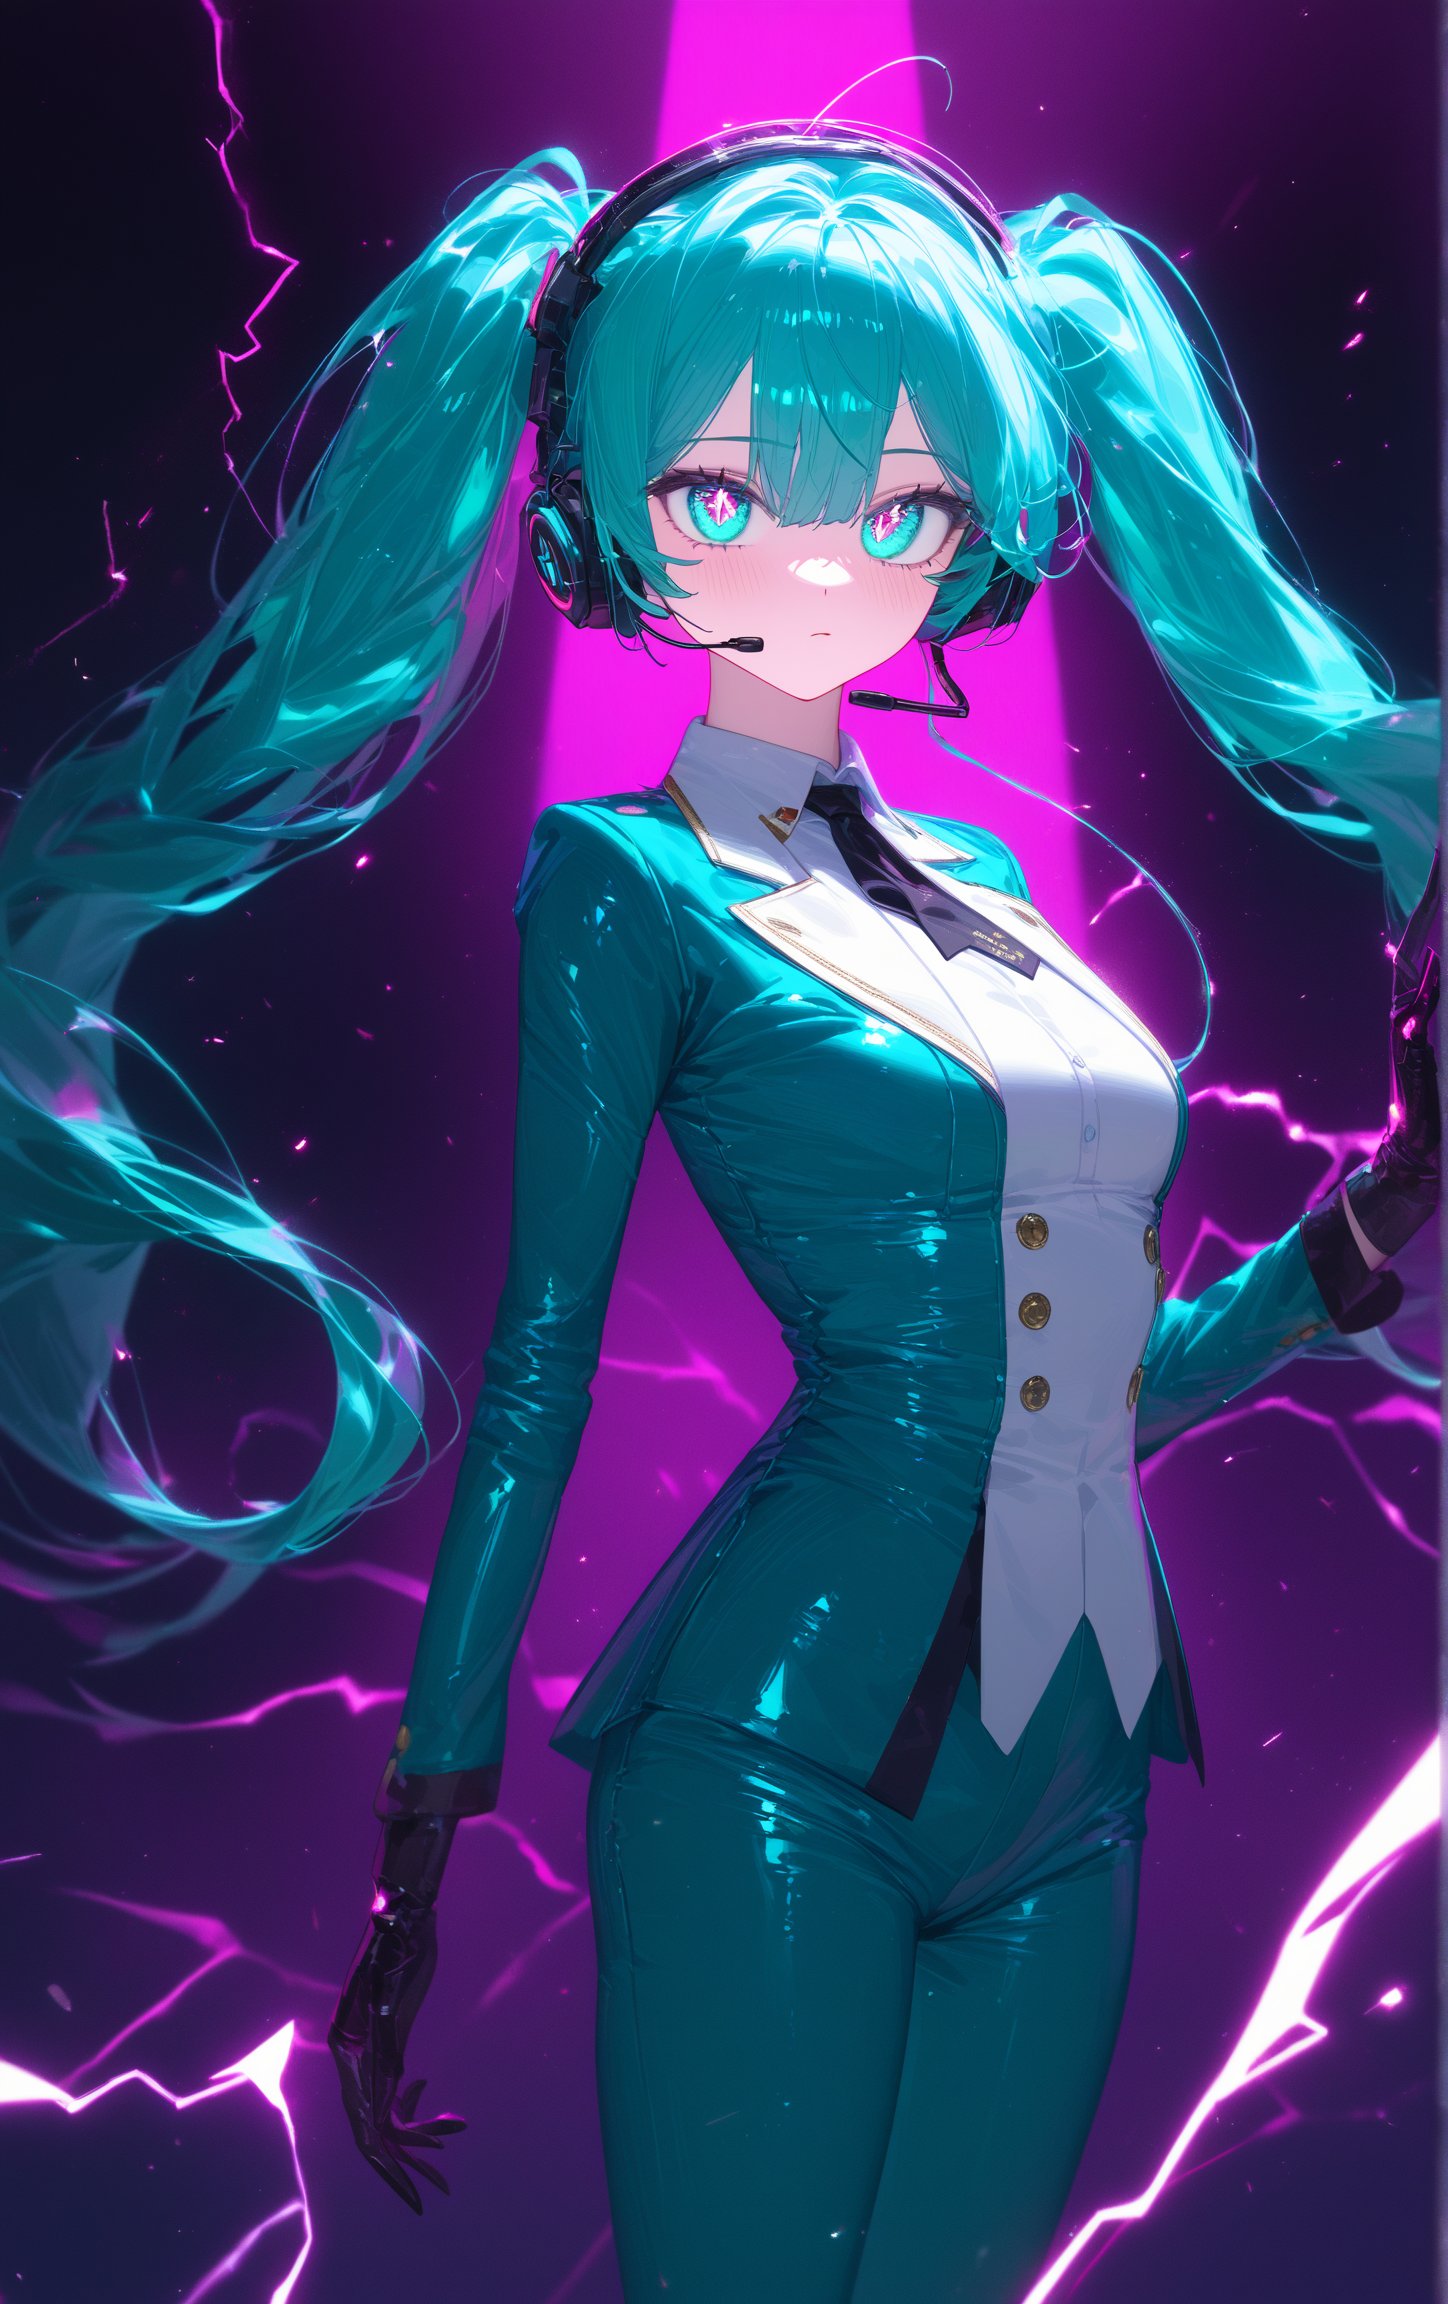 SCORE_9, SCORE_8_UP, SCORE_7_UP, SCORE_6_UP,

MASTERPIECE, BEST QUALITY, HIGH QUALITY, 
HIGHRES, ABSURDRES, PERFECT COMPOSITION,
INTRICATE DETAILS, ULTRA-DETAILED,
PERFECT FACE, PERFECT EYES,
NEWEST, 

Movie Poster page, (promotional poster), Hatsune Miku, 1female, solo, humanoid android, teal hair, teal eyes, singer's uniform, headset, WeirdOutfit style, concert, Nippon Budokan, glowneon, glowing, sparks, lightning, shadow minimalism, (best quality), (masterpiece), detailed, beautiful detailed eyes, perfect anatomy, perfect body, perfect face, perfect hair, perfect legs, perfect hands, perfect arms, perfect fingers, detailed hair, detailed face, detailed eyes, detailed clothes, detailed skin, ultra-detailed, (full body), (upper body), (top quality), pop art, extremely detailed, extremely detailed CG, (high resolution), highly detailed, (high quality), (perfect quality), (glitchcore colors), rabbitholemiku